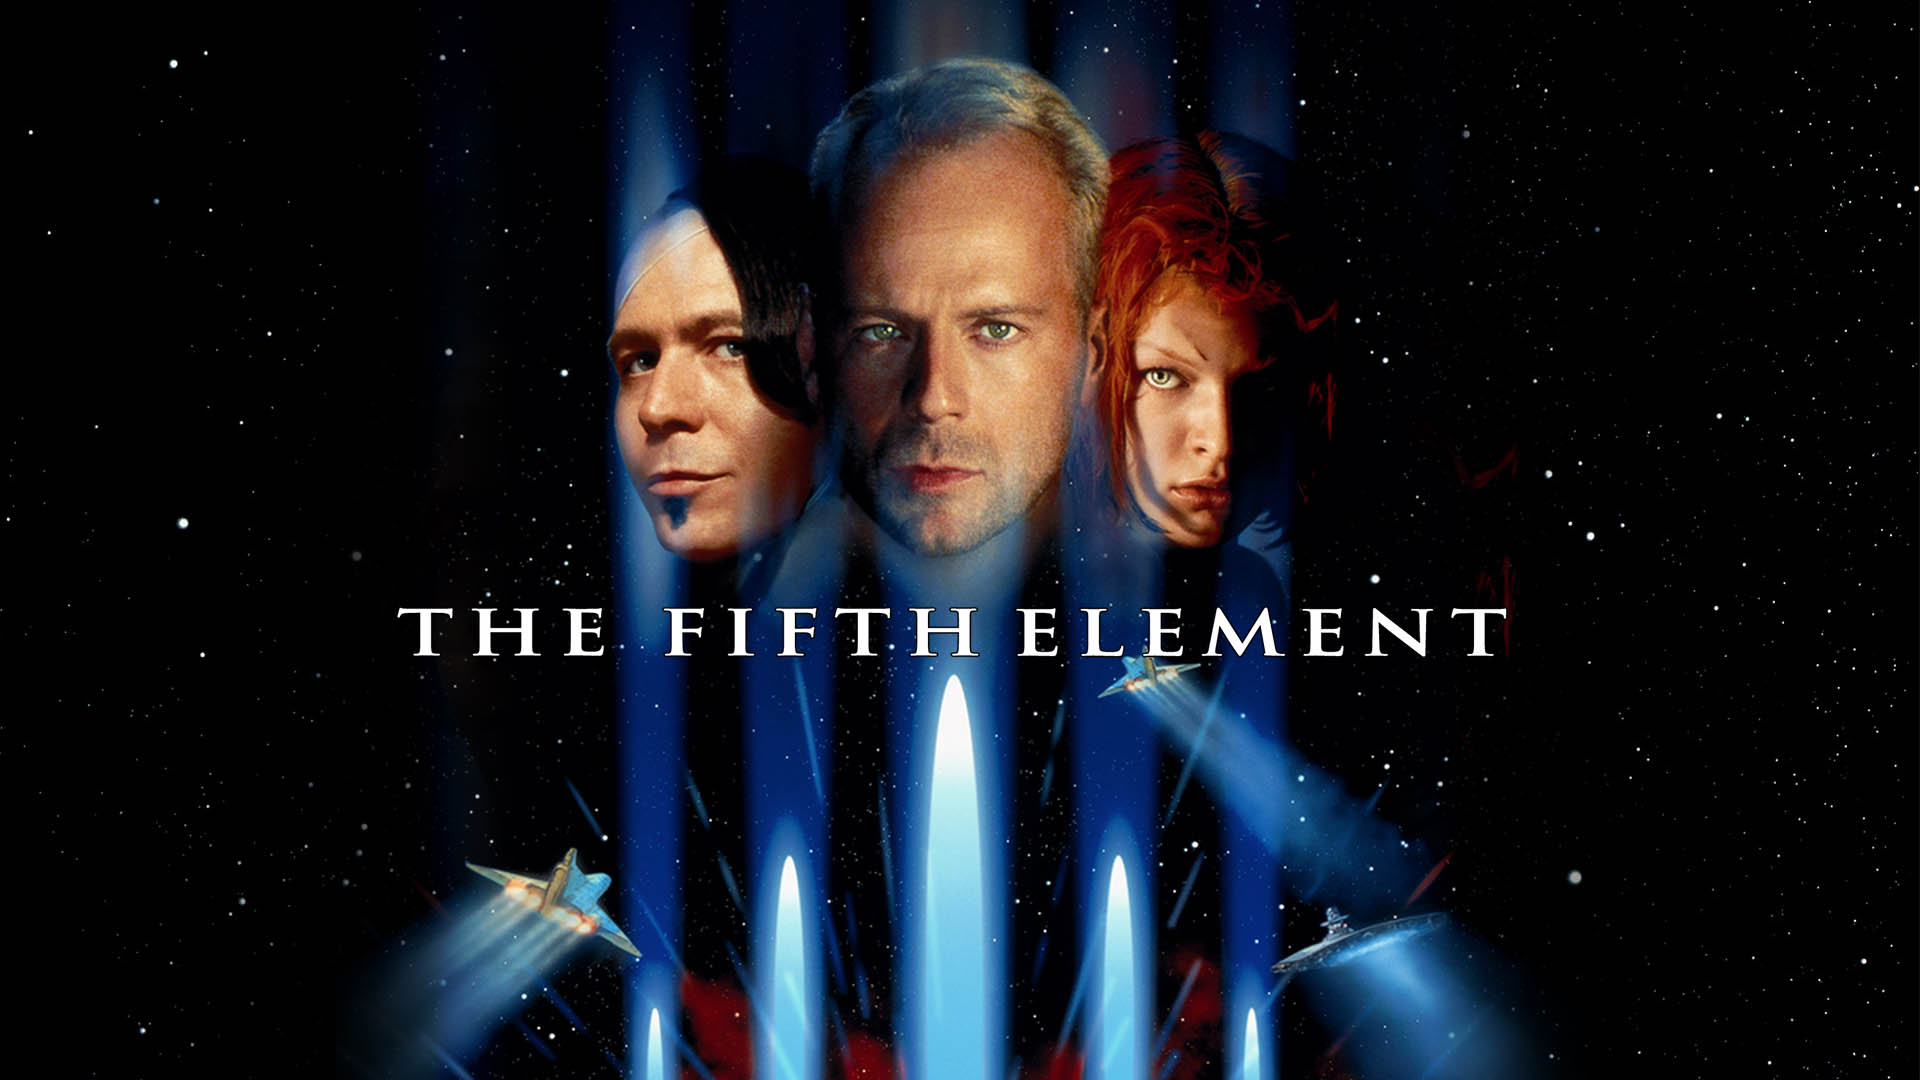 Watch The Fifth Element Online | Stream Full Movies